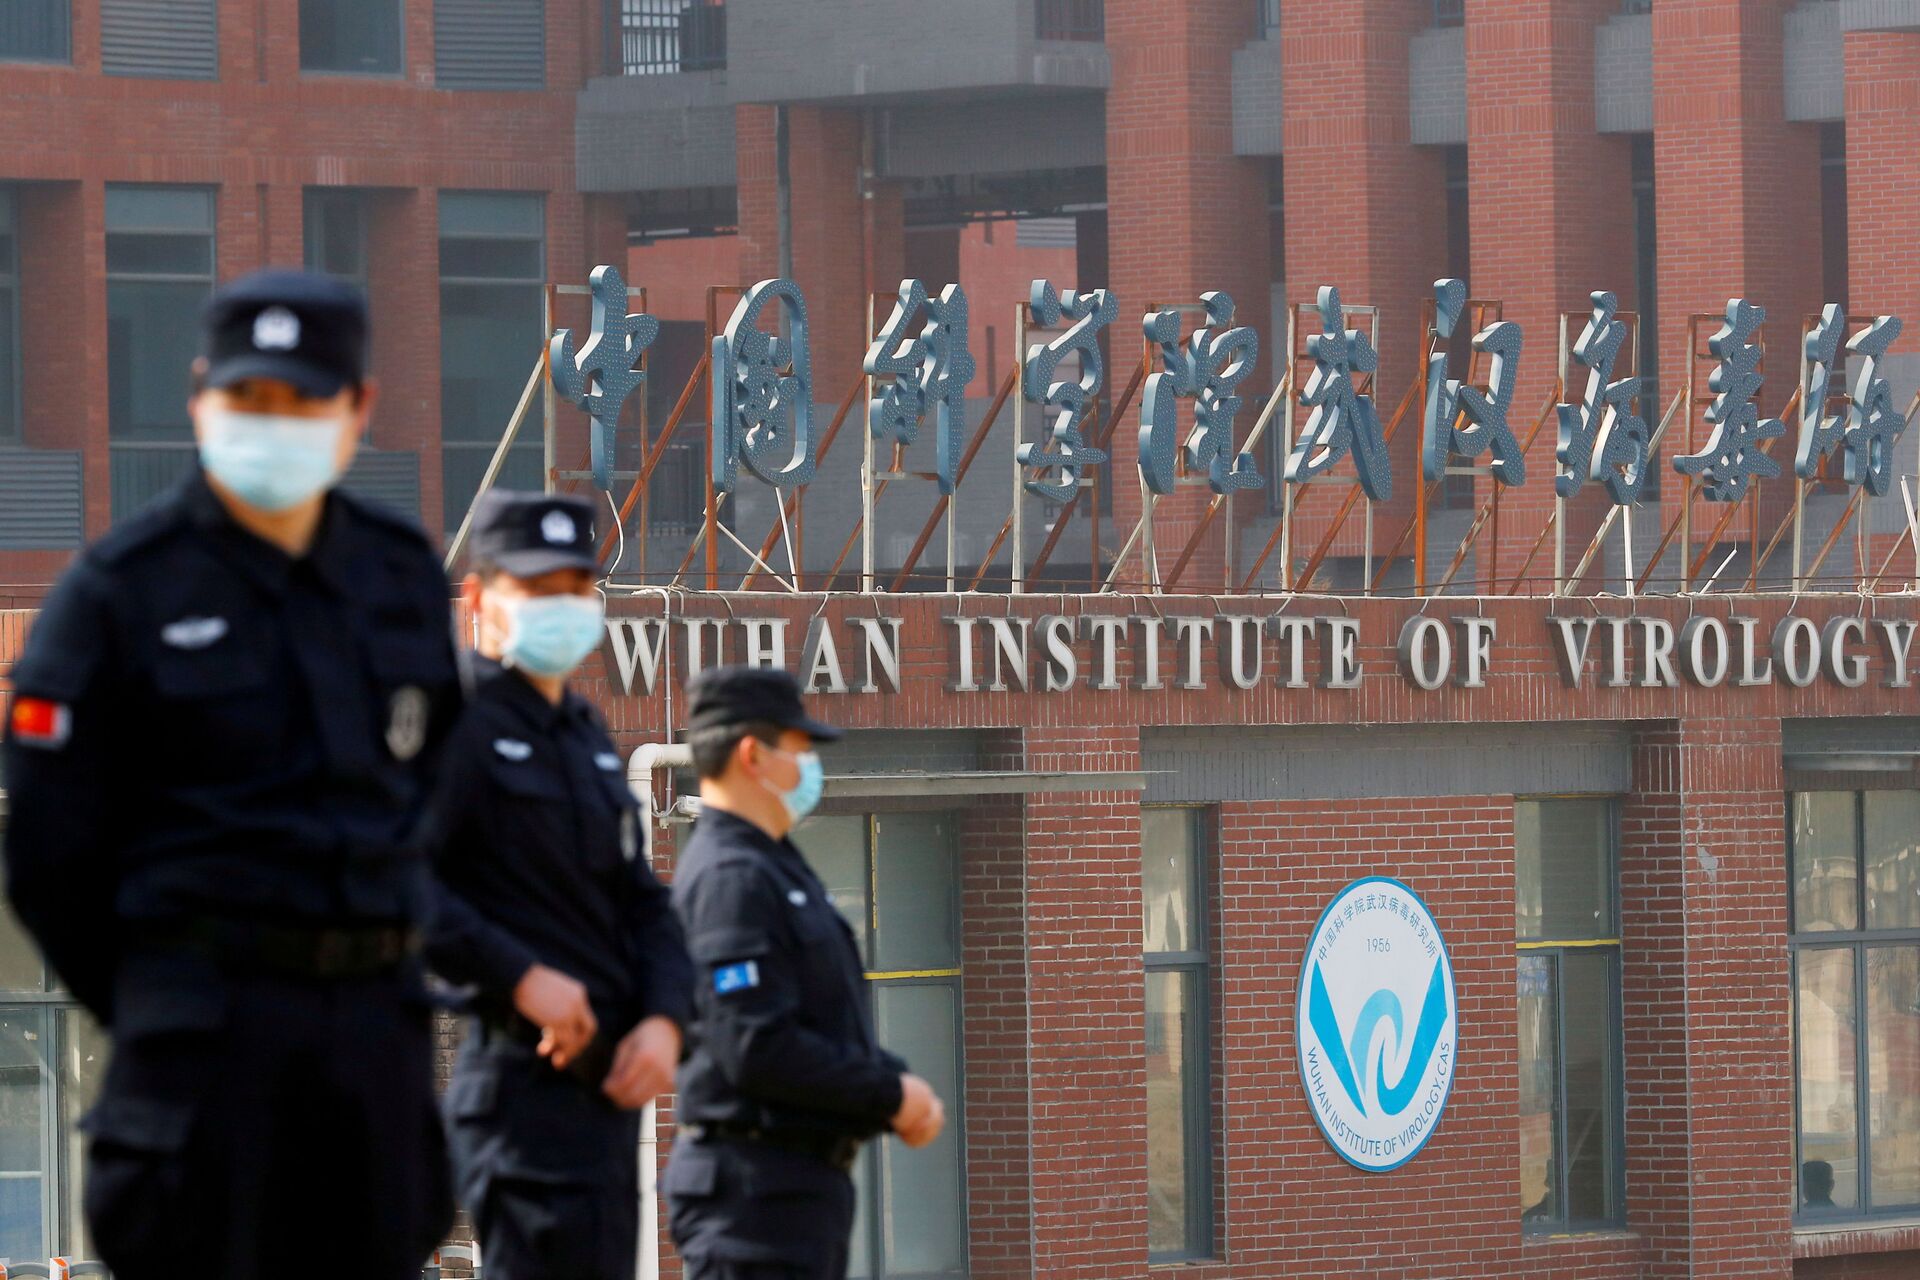 Security personnel keep watch outside the Wuhan Institute of Virology during the visit by the World Health Organization (WHO) team tasked with investigating the origins of the coronavirus disease (COVID-19), in Wuhan, Hubei province, China February 3, 2021.  - Sputnik International, 1920, 07.09.2021